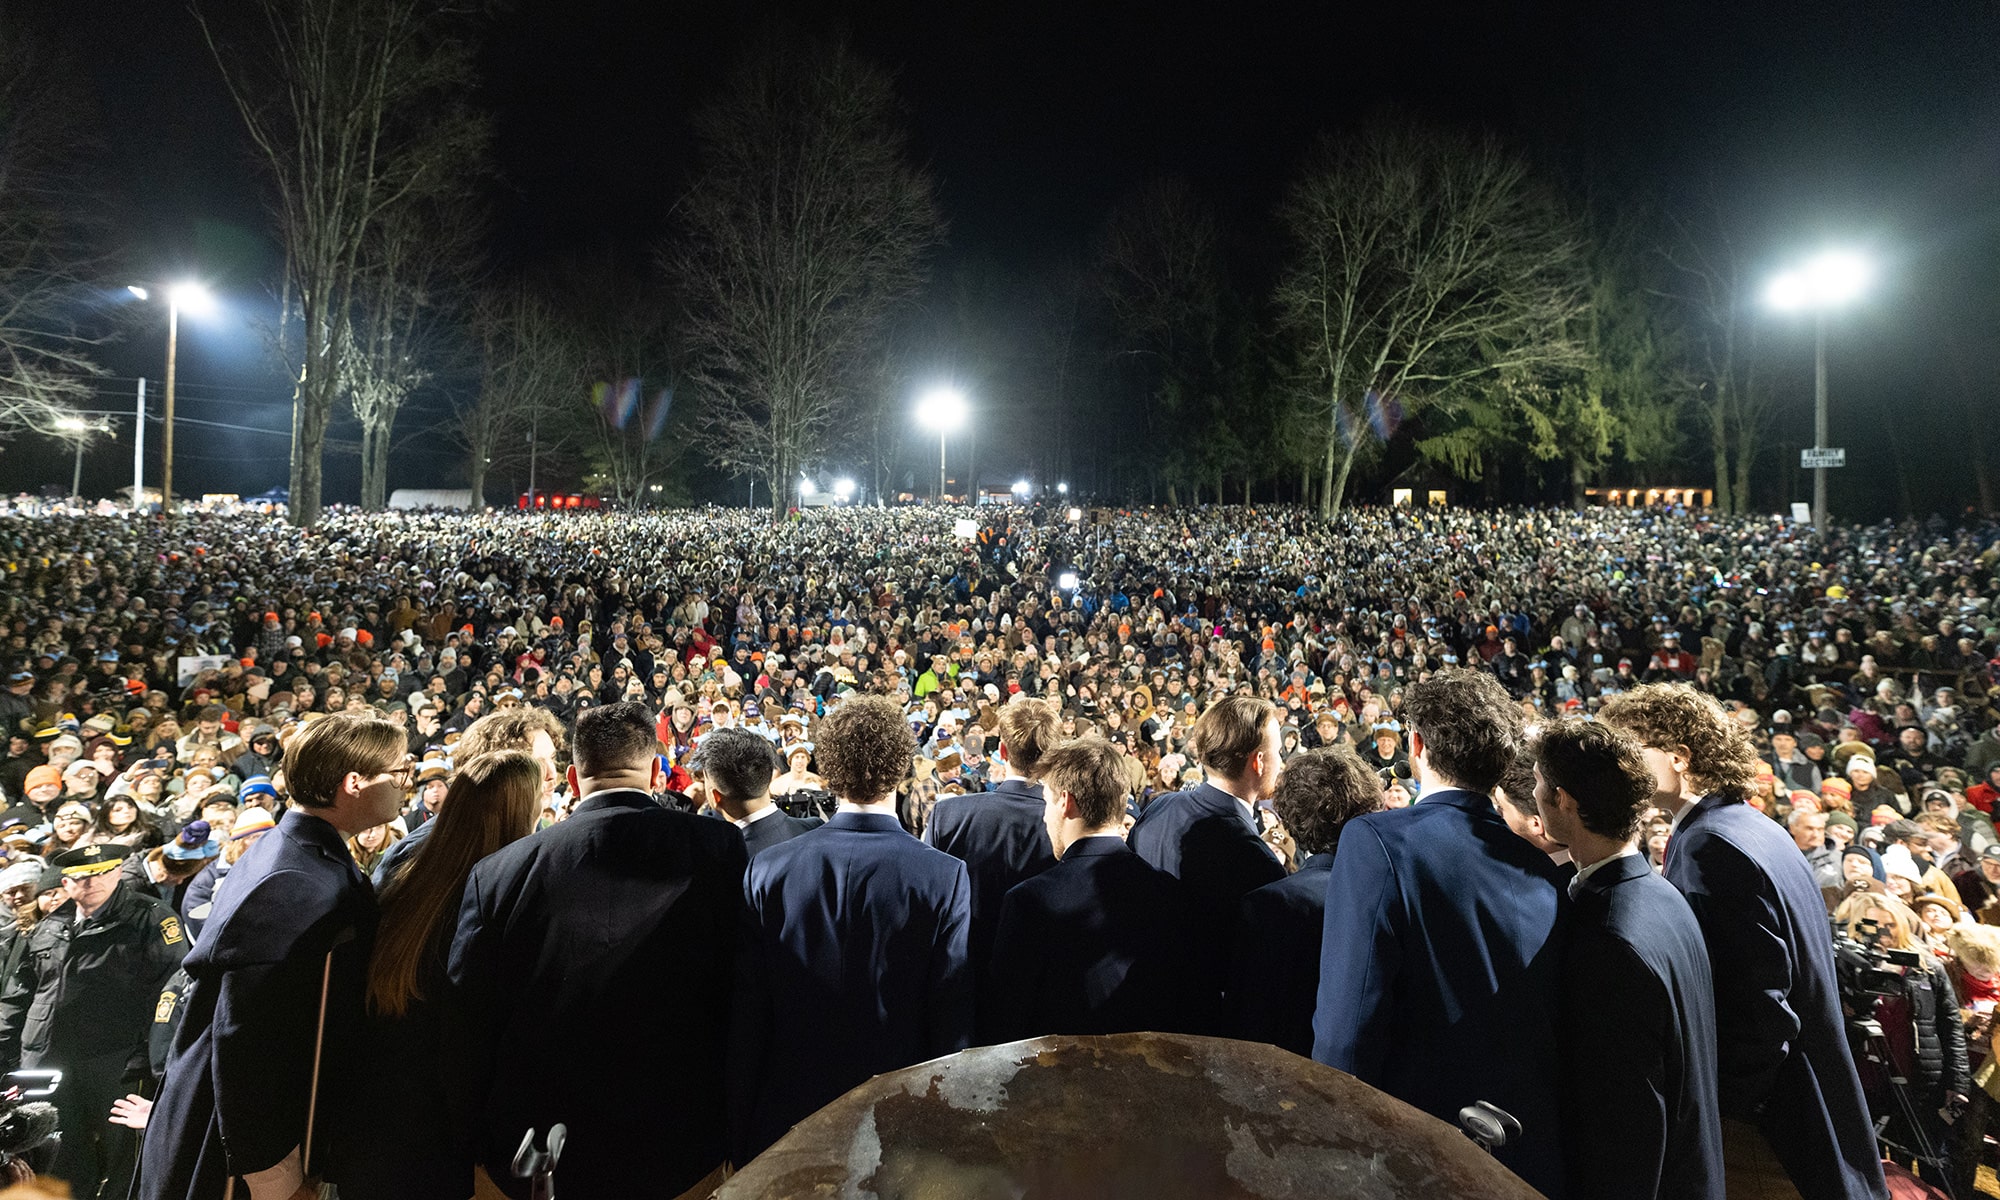 Hilltoppers in front of a massive crowd